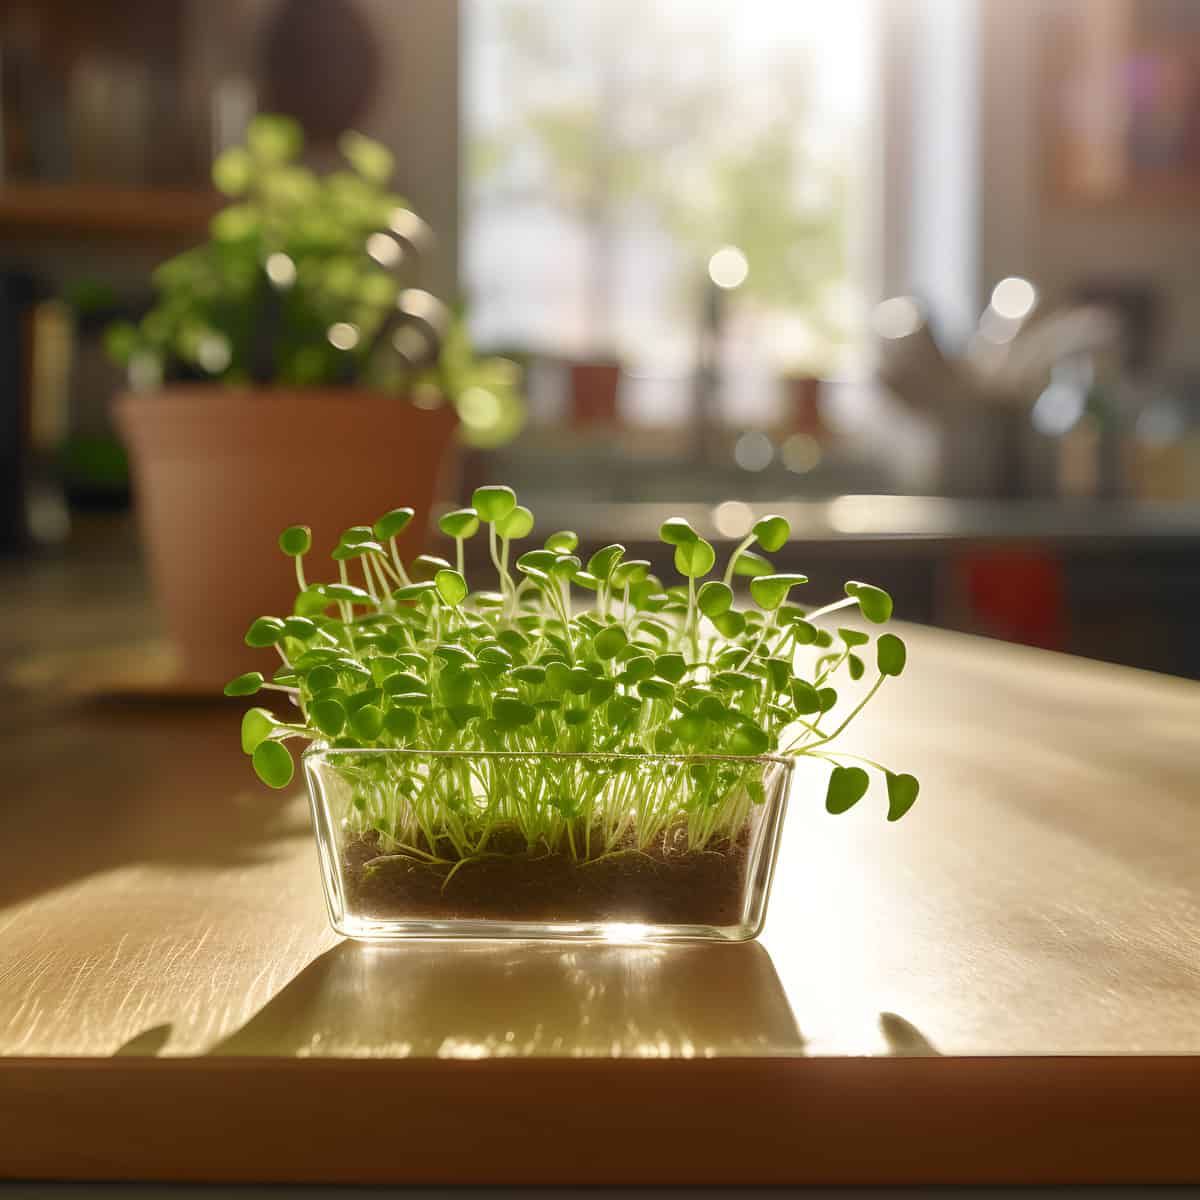 Cress on a kitchen counter